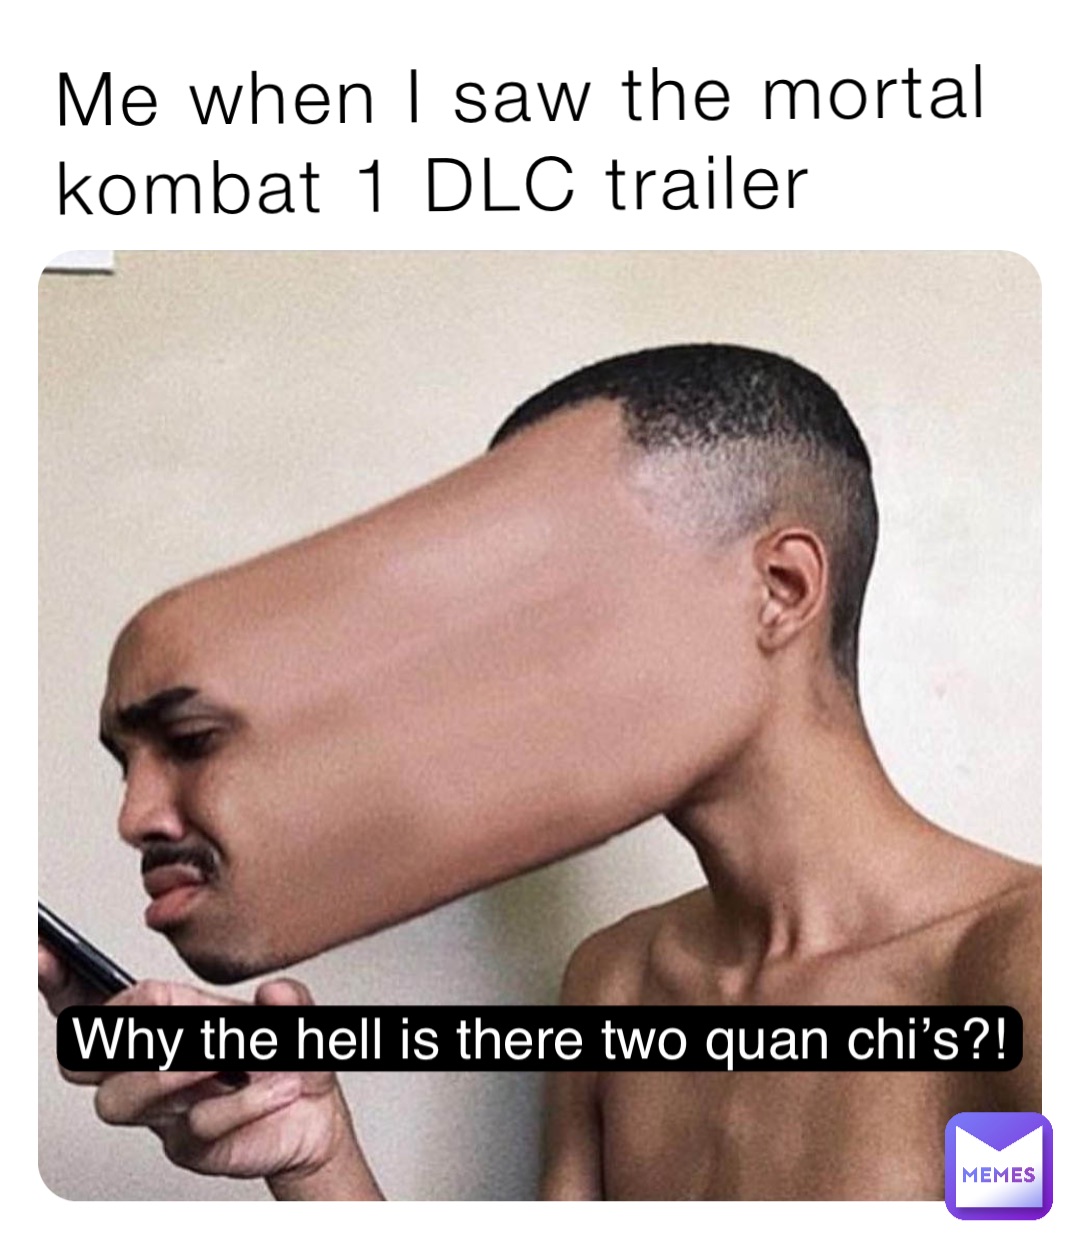 Me when I saw the mortal kombat 1 DLC trailer Why the hell is there two quan chi’s?!